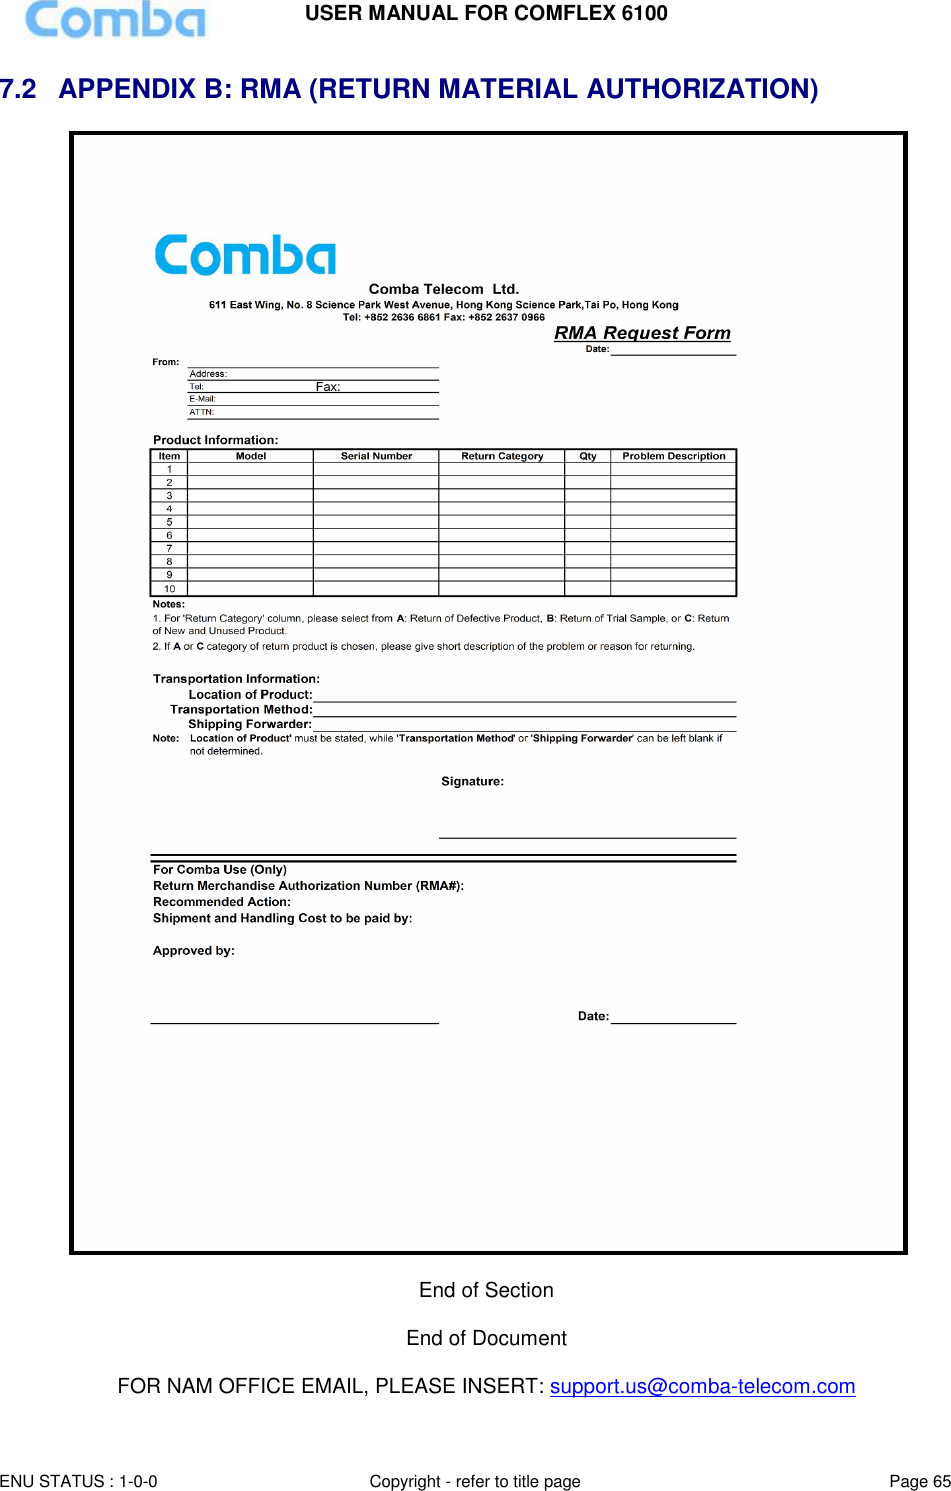 USER MANUAL FOR COMFLEX 6100  ENU STATUS : 1-0-0 Copyright - refer to title page Page 65     7.2  APPENDIX B: RMA (RETURN MATERIAL AUTHORIZATION)   End of Section  End of Document  FOR NAM OFFICE EMAIL, PLEASE INSERT: support.us@comba-telecom.com  